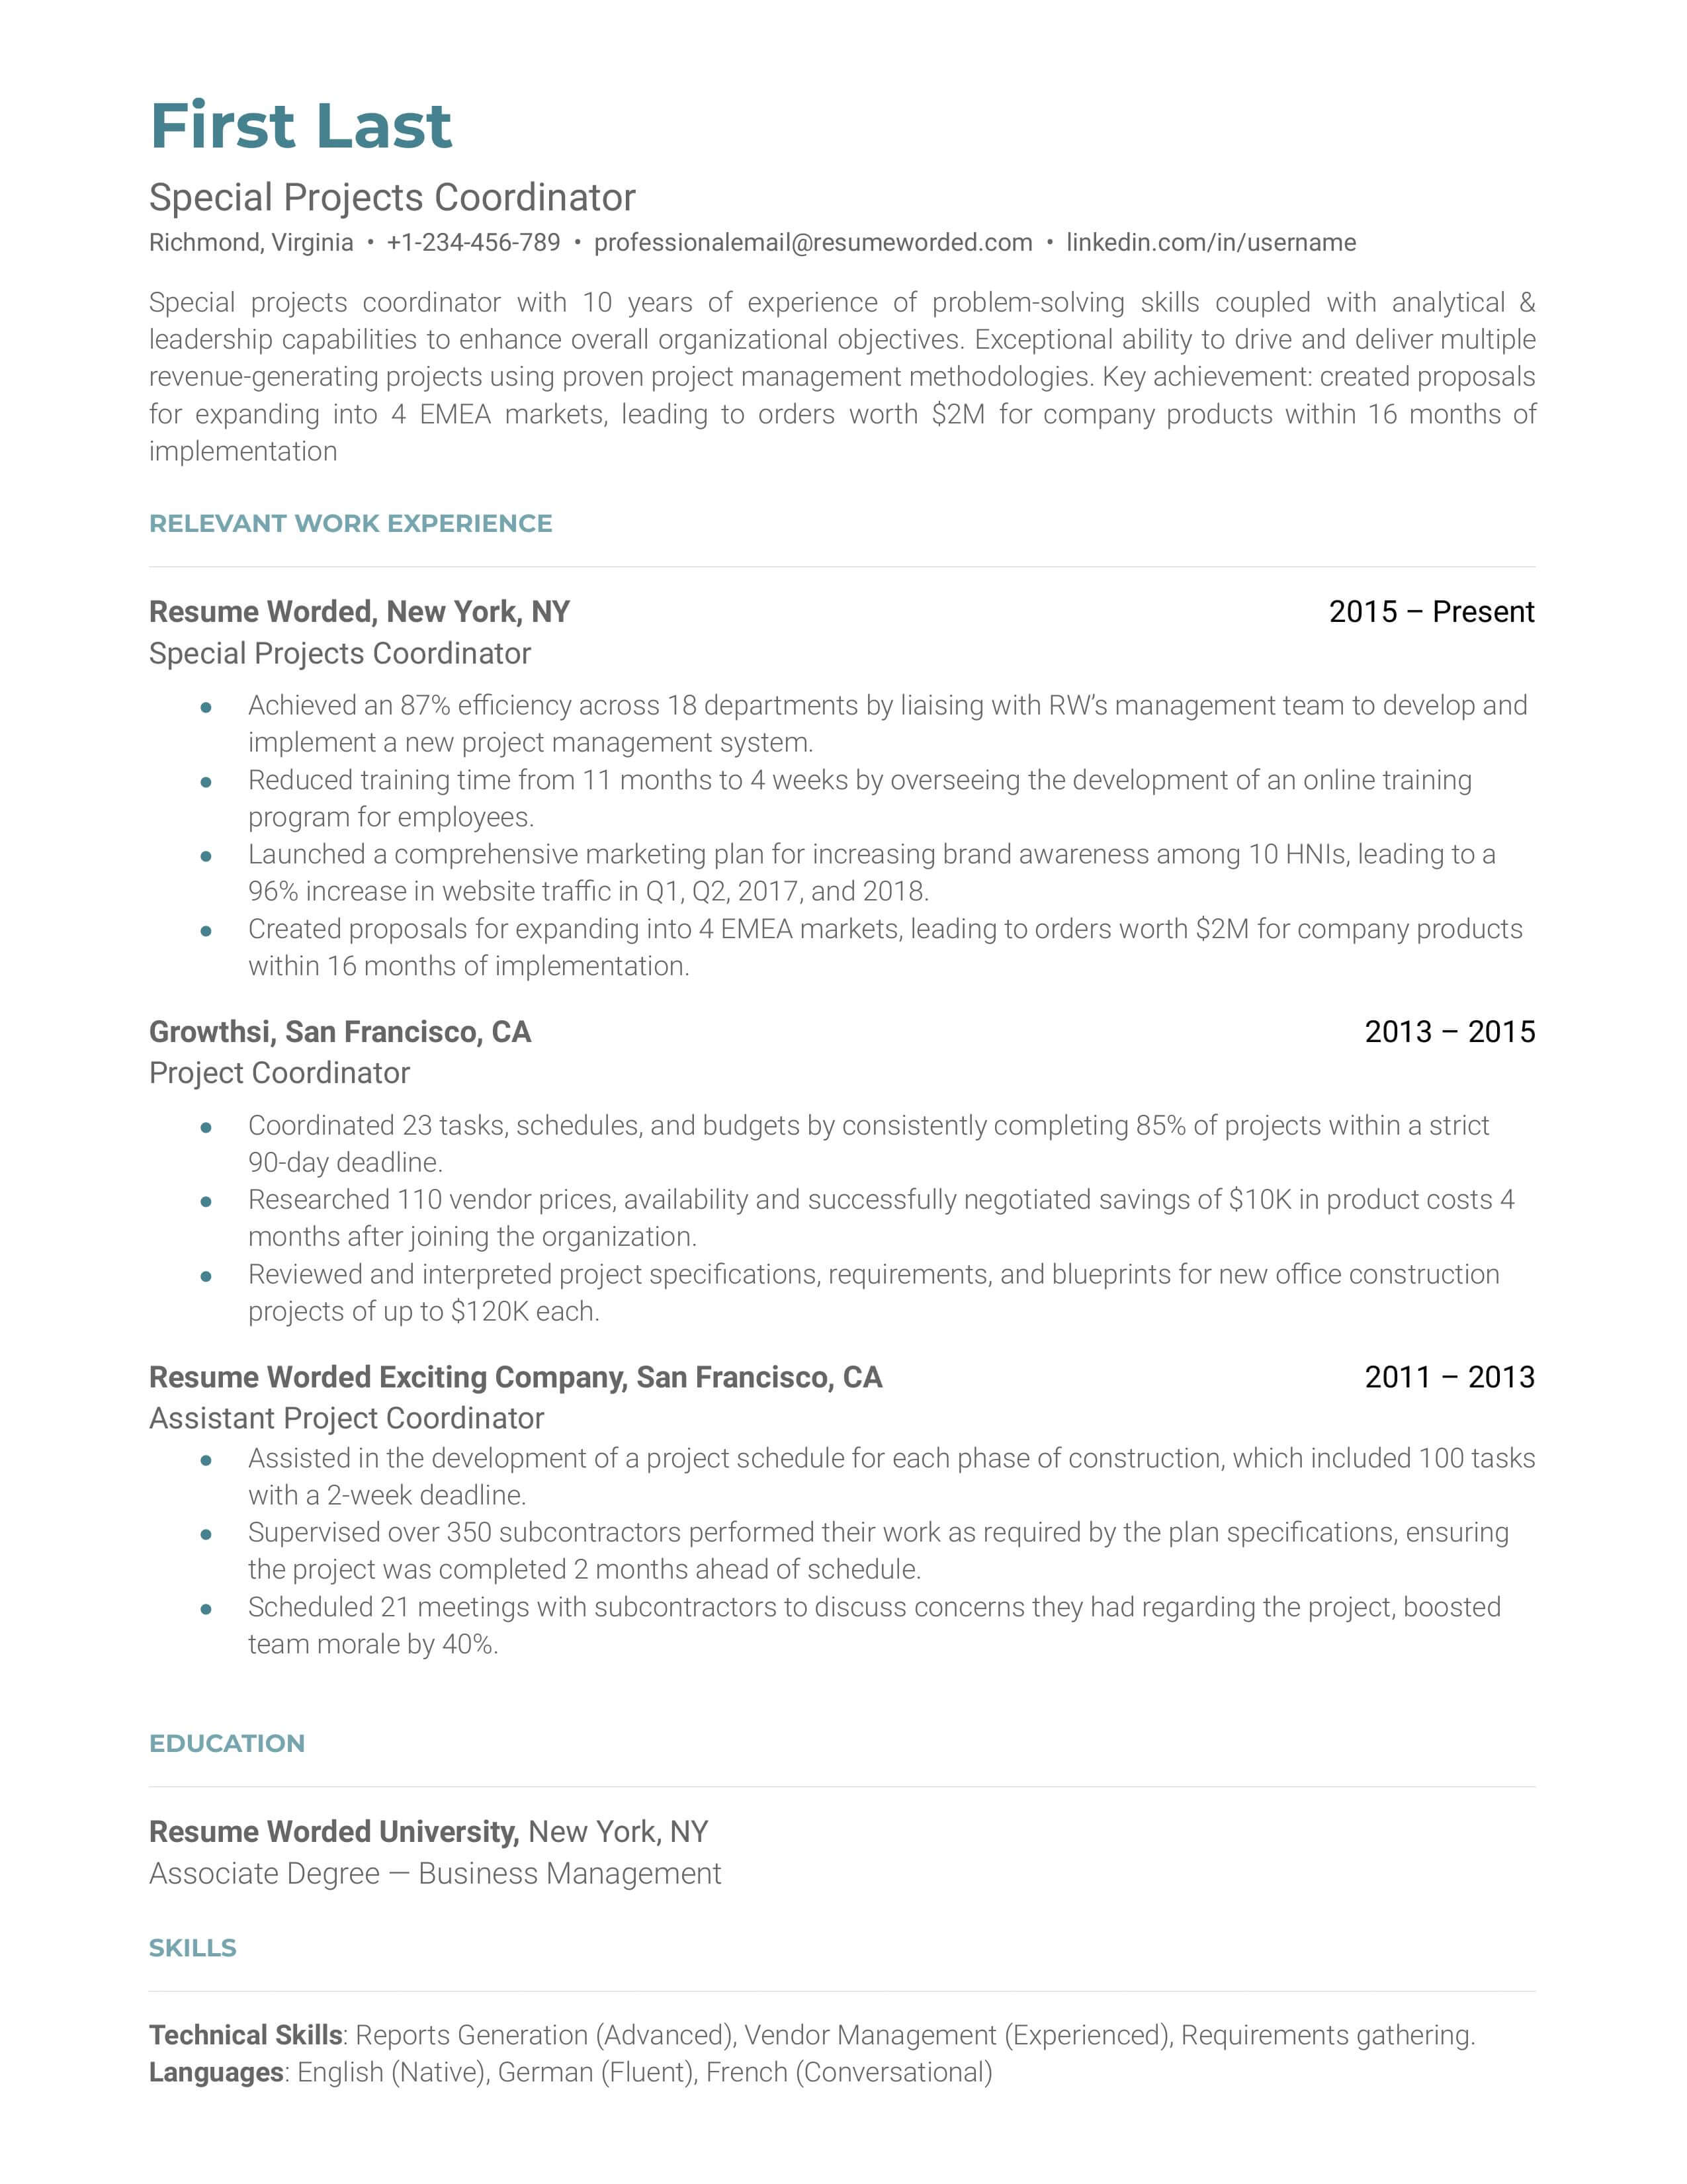 Special Projects Coordinator Resume Sample